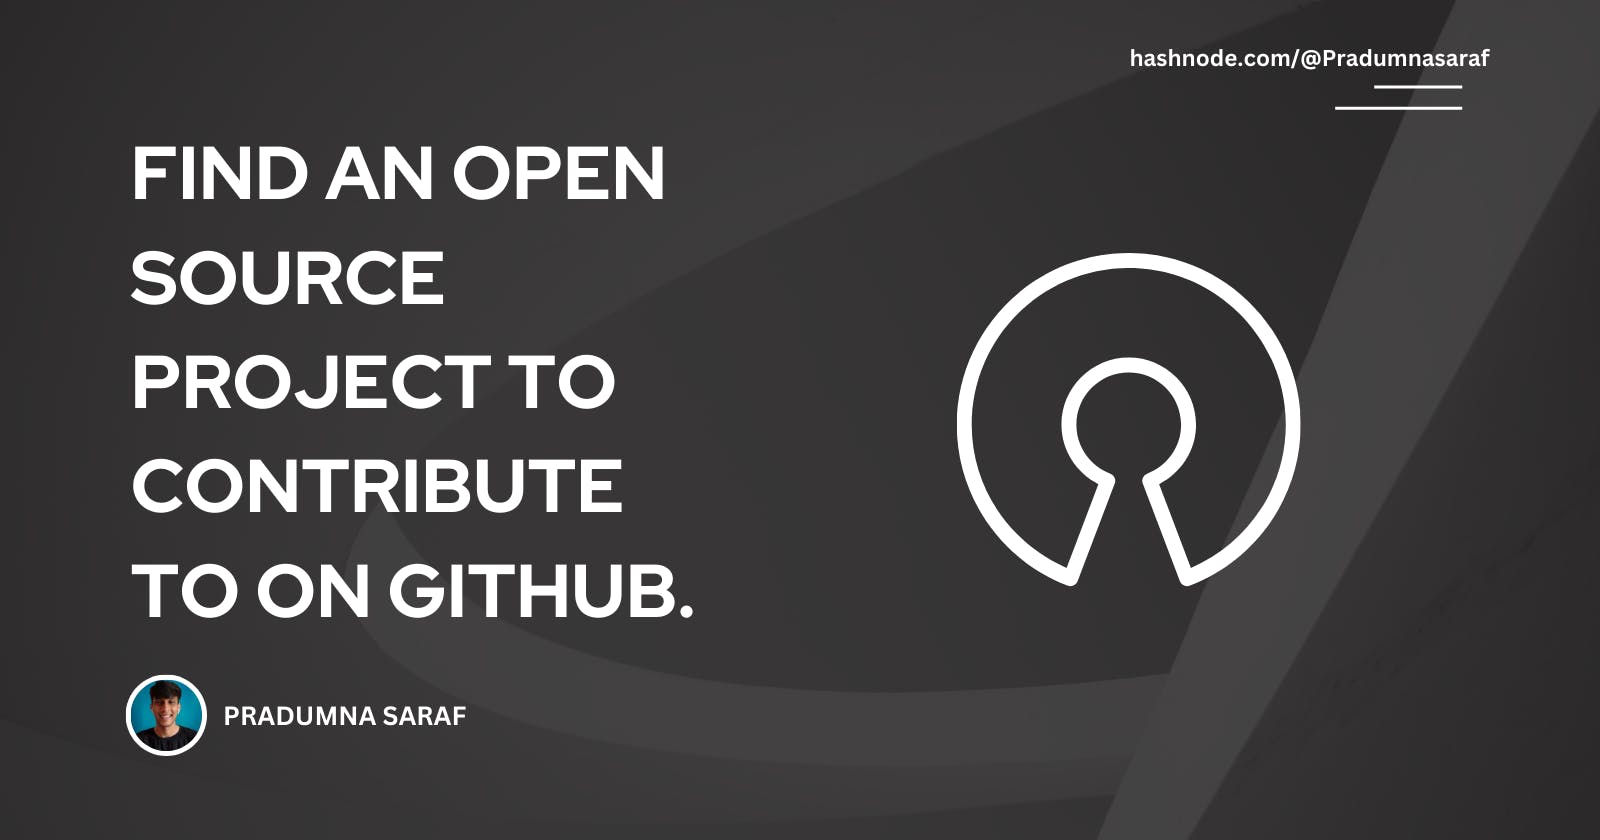 Find an Open Source project to contribute to on GitHub